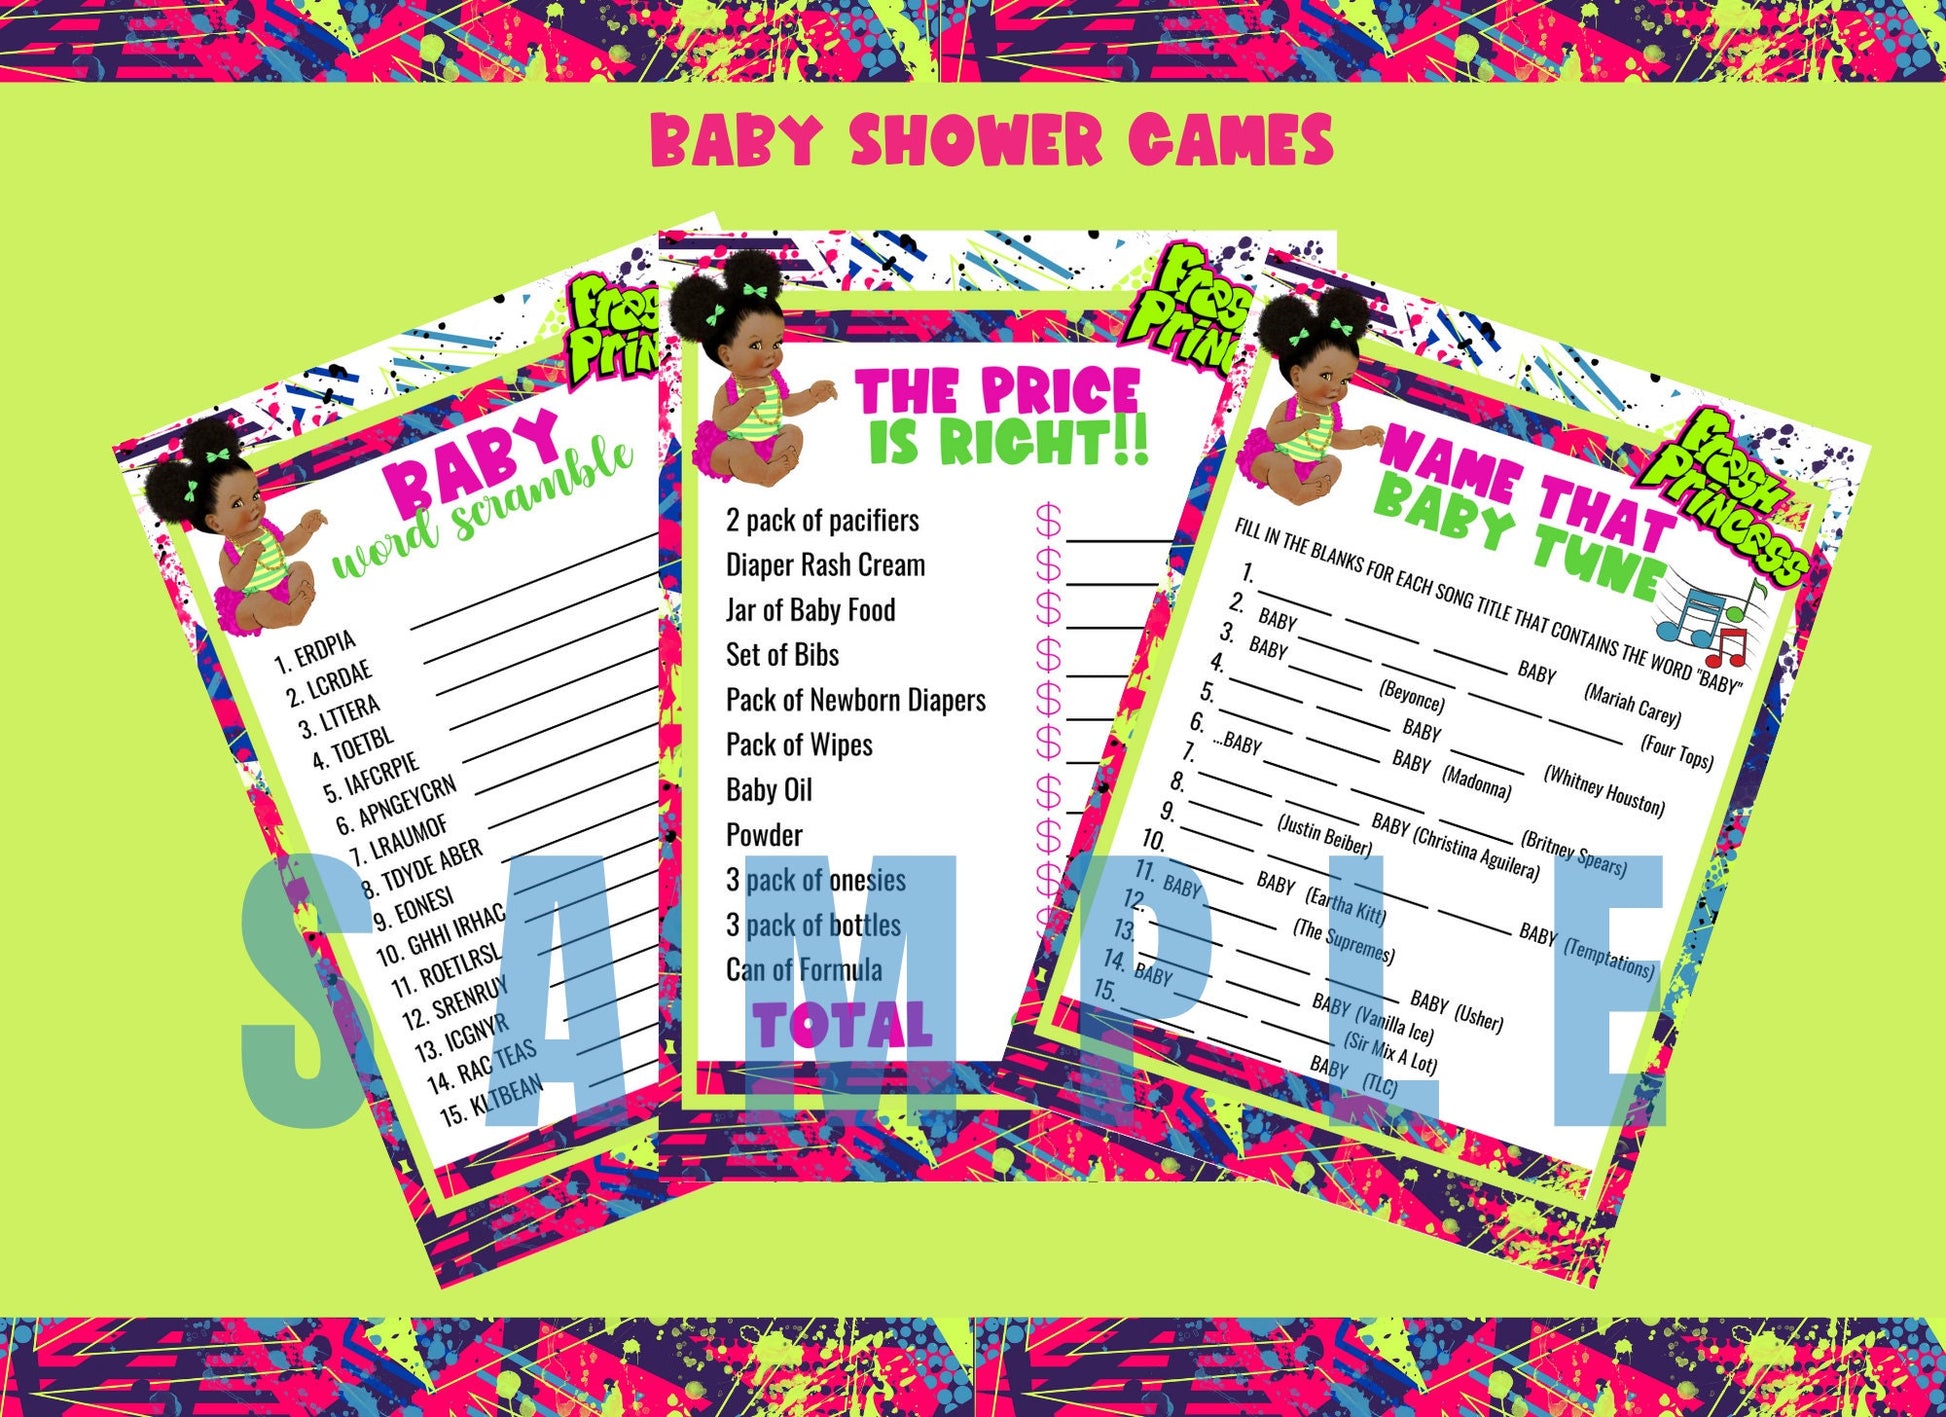 Fresh Princess Baby Shower Games, 90s Theme Baby Shower Games, Instant Download, Baby Shower Printable - SthrngurlCreations